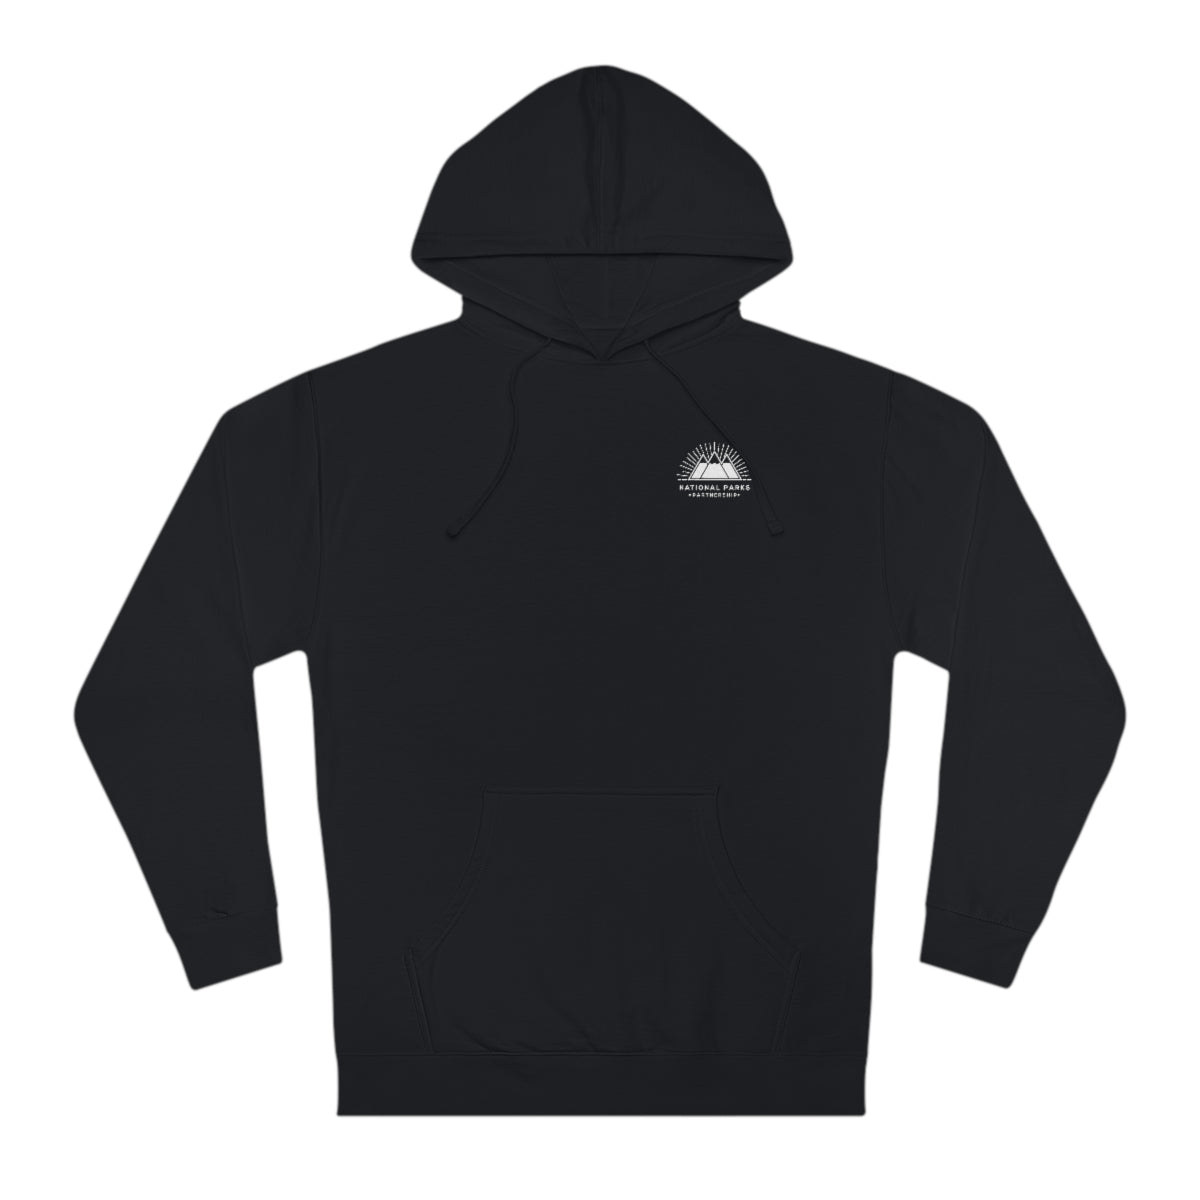 Black Canyon of the Gunnison National Park Hoodie - Lines